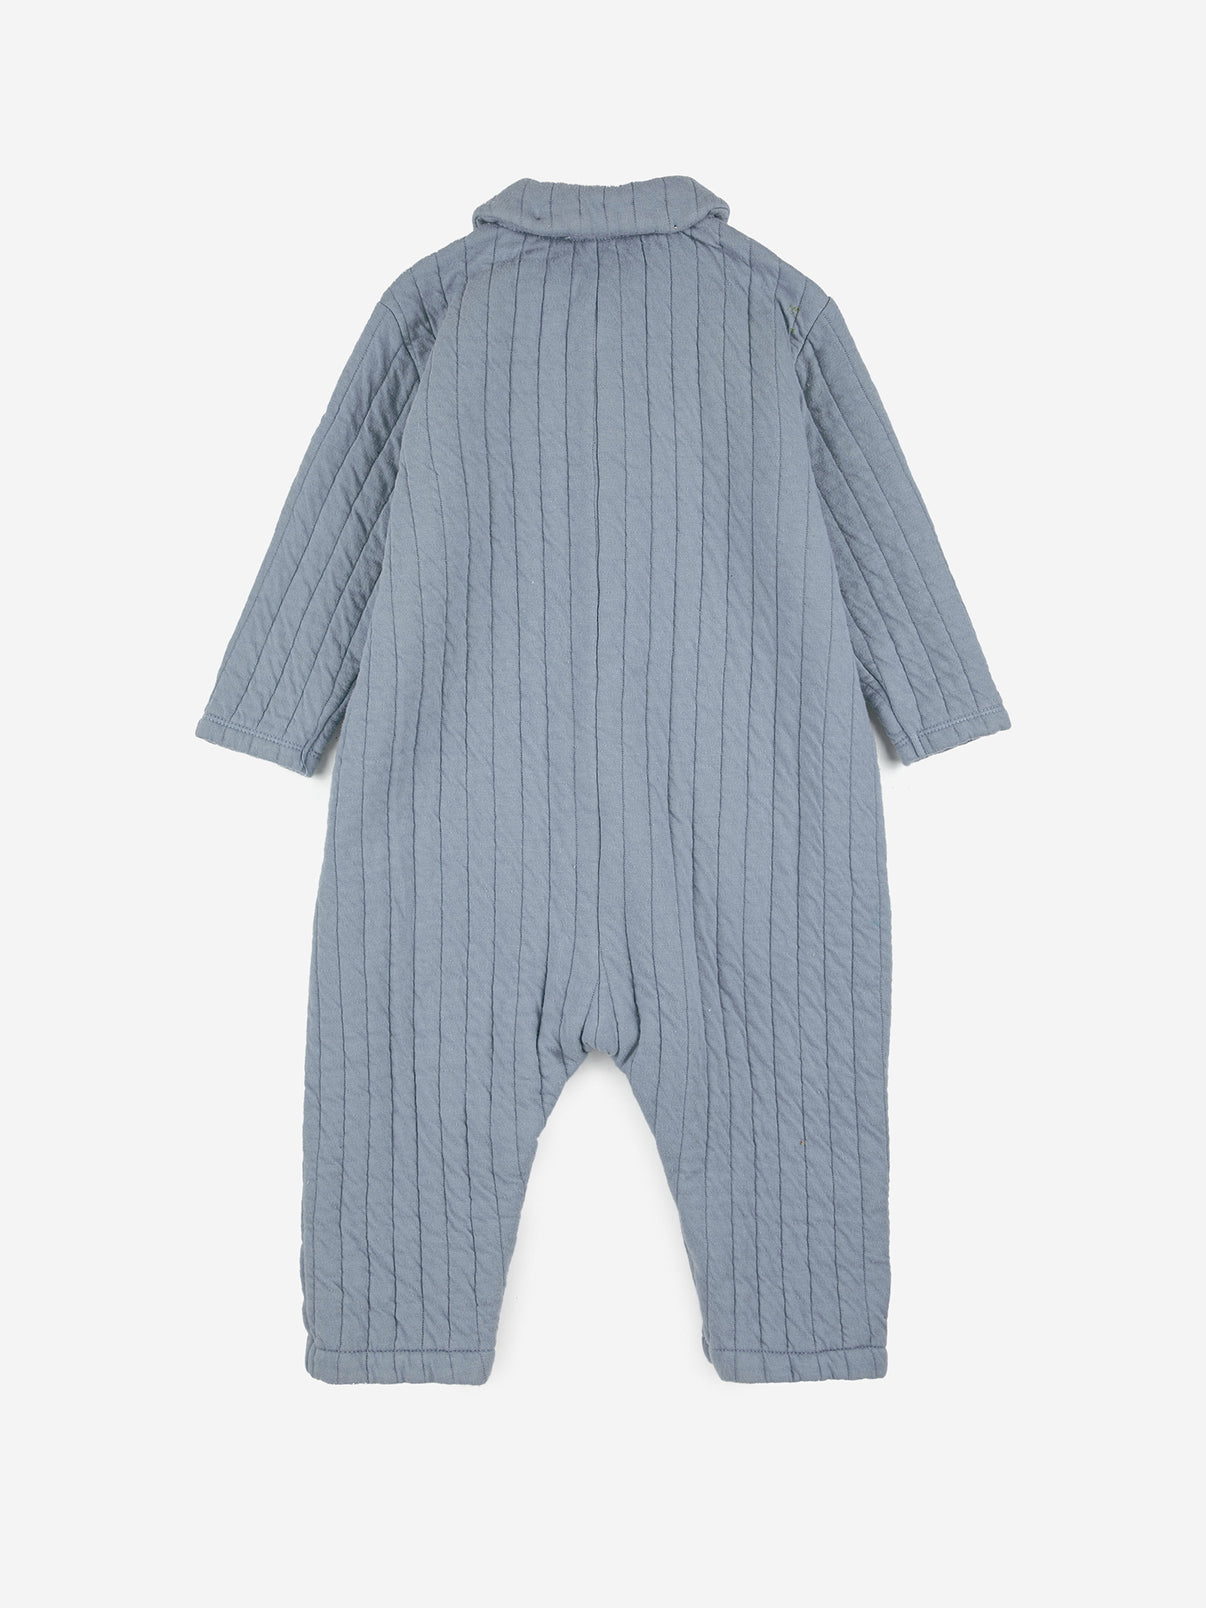 Bobo Choses Baby Quilted Overalls - 78% cotton 22% polyester blue overall. Designed with spread collar, front snap fastening, crotch snap fastening, patch and patch pocket. It has a relaxed fit. Made in Portugal.'